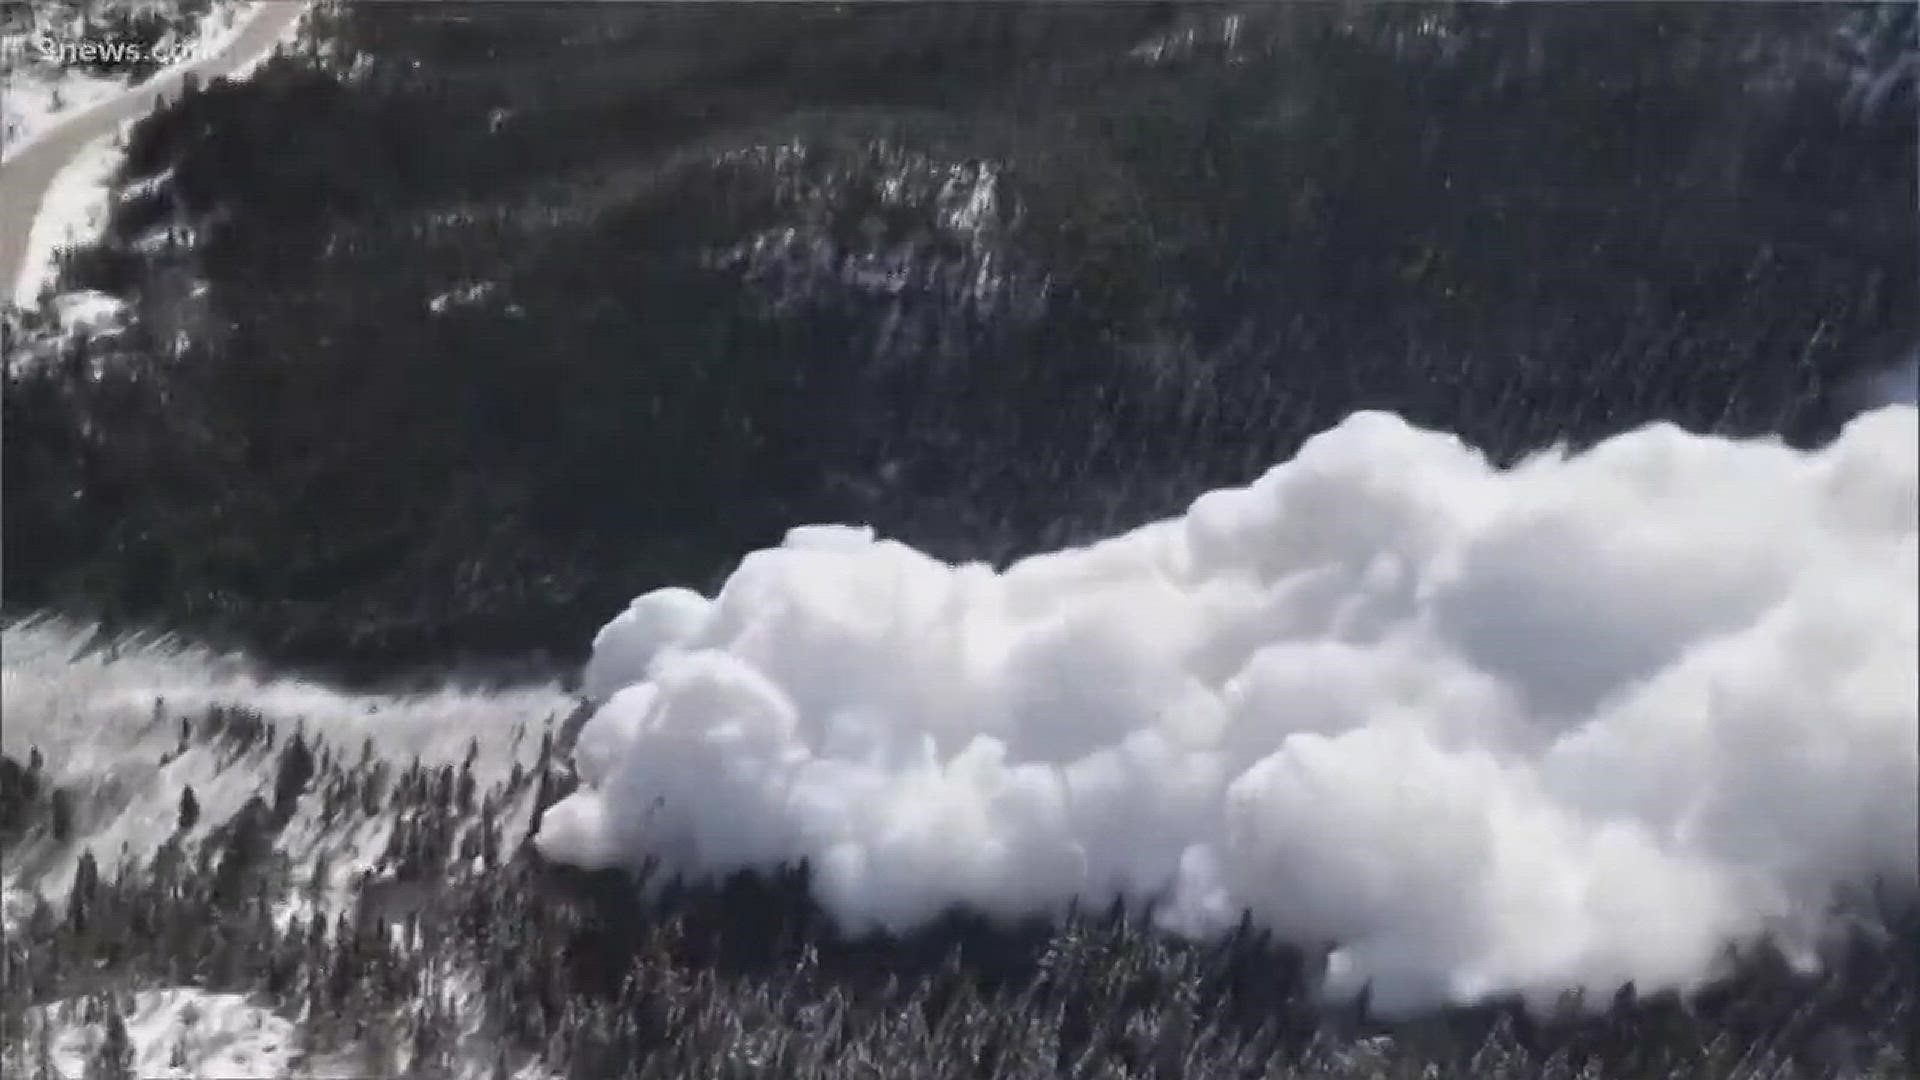 A look at the damage left behind after we saw one of the biggest avalanches to hit Colorado in more than half a century.